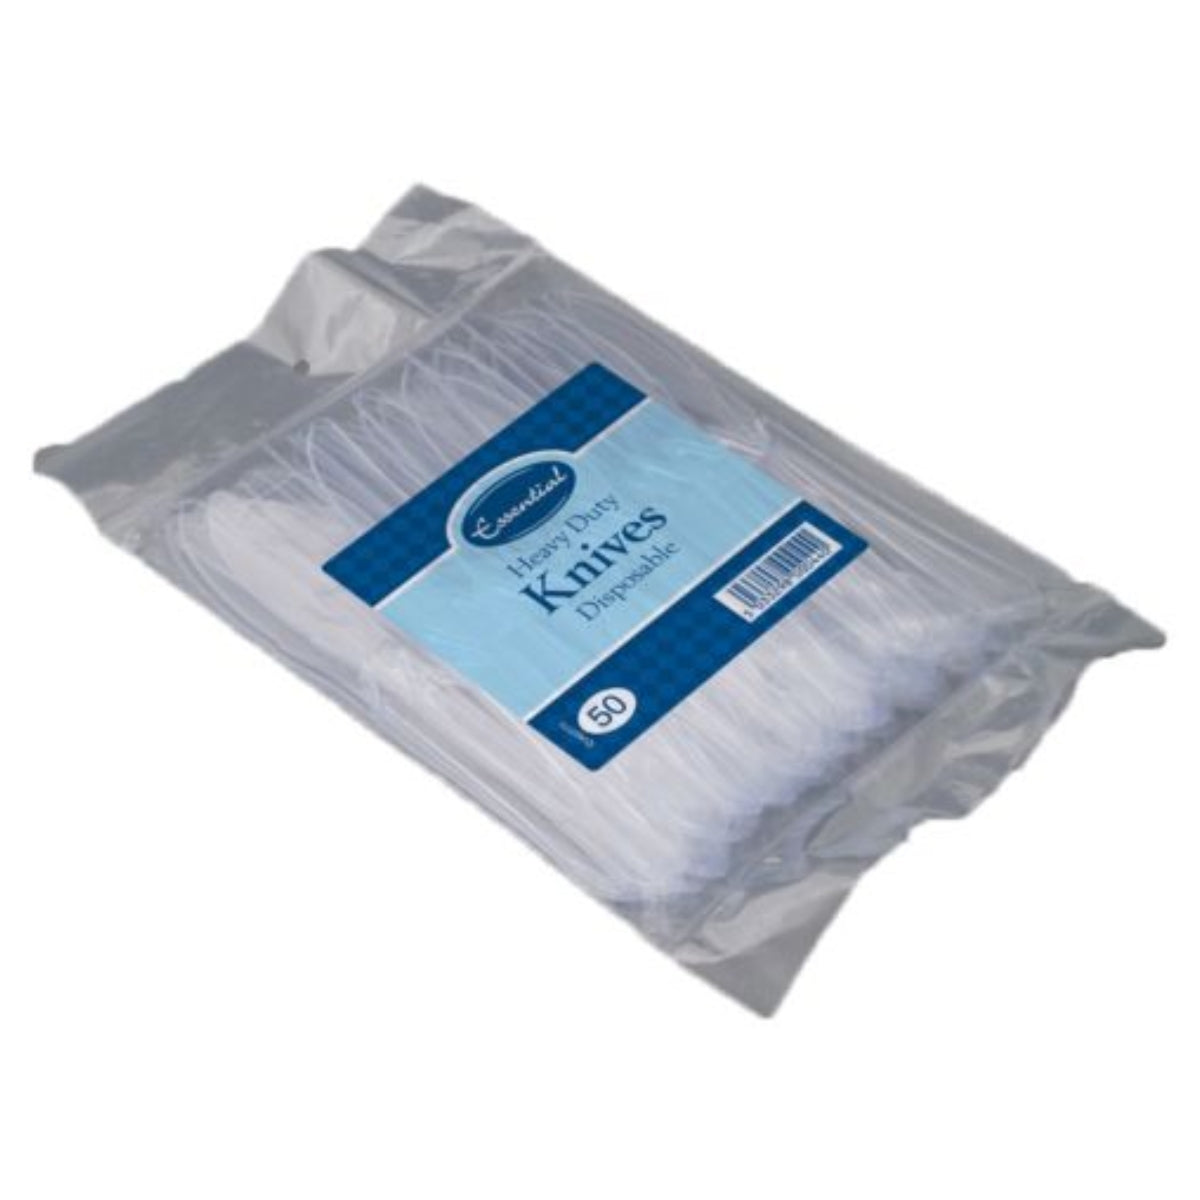 A pack of Essential - Heavy Duty Plastic Knives - 50 Pack, sealed in clear plastic wrapping with a blue label.